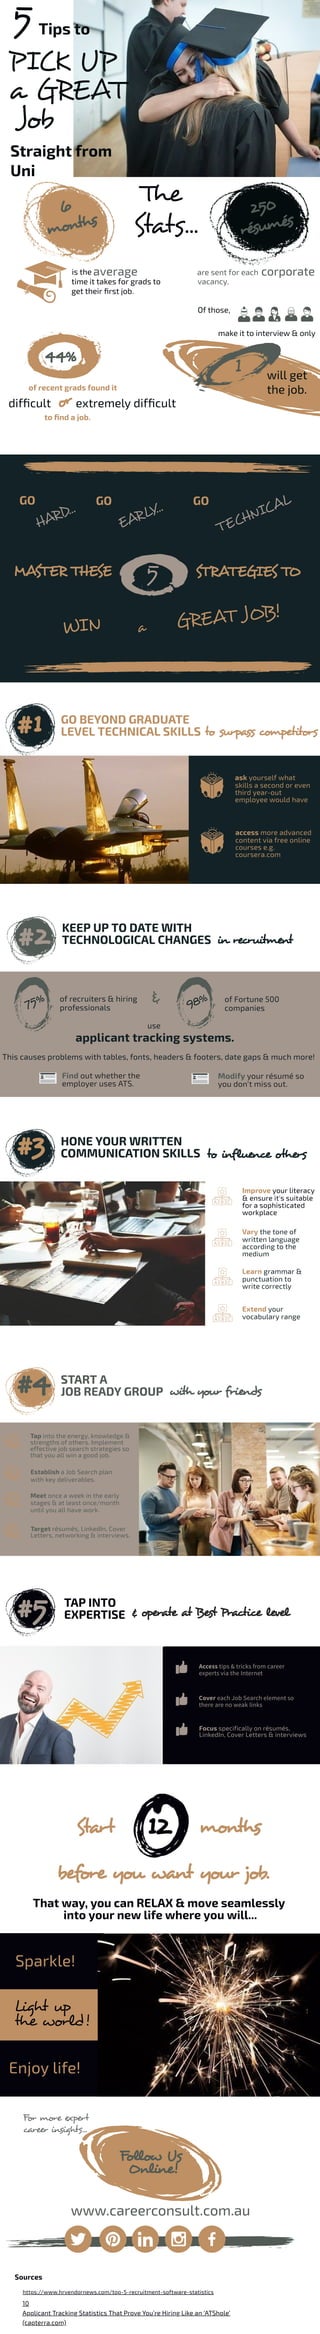 MASTER THESE
Improve your literacy
& ensure it's suitable
for a sophisticated
workplace
a
of recruiters & hiring
professionals
HONE YOUR WRITTEN
COMMUNICATION SKILLS
Vary the tone of
written language
according to the
medium
Sources
WIN
#1
#3
Learn grammar &
punctuation to
write correctly
www.careerconsult.com.au
Straight from
Uni
GREAT JOB!
GO BEYOND GRADUATE
LEVEL TECHNICAL SKILLS
&
to influence others
Sparkle!
5
access more advanced
content via free online
courses e.g.
coursera.com
of Fortune 500
companies
PICK UP
use
applicant tracking systems.
Light up
the world!
a GREAT
Job
ask yourself what
skills a second or even
third year-out
employee would have
This causes problems with tables, fonts, headers & footers, date gaps & much more!
Extend your
vocabulary range
Enjoy life!
Tips to
Start
The
Stats...
Modify your résumé so
you don't miss out. 
Tap into the energy, knowledge &
strengths of others. Implement
effective job search strategies so
that you all win a good job. 
before you want your job.
For more expert
career insights...
250
résumés
STRATEGIES TO
#2
START A
JOB READY GROUP
Establish a Job Search plan
with key deliverables. 
That way, you can RELAX & move seamlessly
into your new life where you will...
Follow Us
Online!
6
months
5
KEEP UP TO DATE WITH
TECHNOLOGICAL CHANGES
Find out whether the
employer uses ATS. 
#4
Meet once a week in the early
stages & at least once/month
until you all have work. 
12
https://www.hrvendornews.com/top-5-recruitment-software-statistics
is the
GO
in recruitment
75%
with your friends 
Target résumés, LinkedIn, Cover
Letters, networking & interviews.
months
10
Applicant Tracking Statistics That Prove You’re Hiring Like an ‘ATShole’
(capterra.com)
are sent for each
GO
to surpass competitors
98%
Of those,
TECHNICAL
#5
EARLY...
TAP INTO
EXPERTISE
GO
& operate at Best Practice level
HARD...
average
Focus specifically on résumés,
LinkedIn, Cover Letters & interviews
make it to interview & only
Cover each Job Search element so
there are no weak links
Access tips & tricks from career
experts via the Internet
time it takes for grads to
get their first job.
1 will get
the job.
of recent grads found it
to find a job.
difficult or extremely difficult
corporate
vacancy.
44%
 